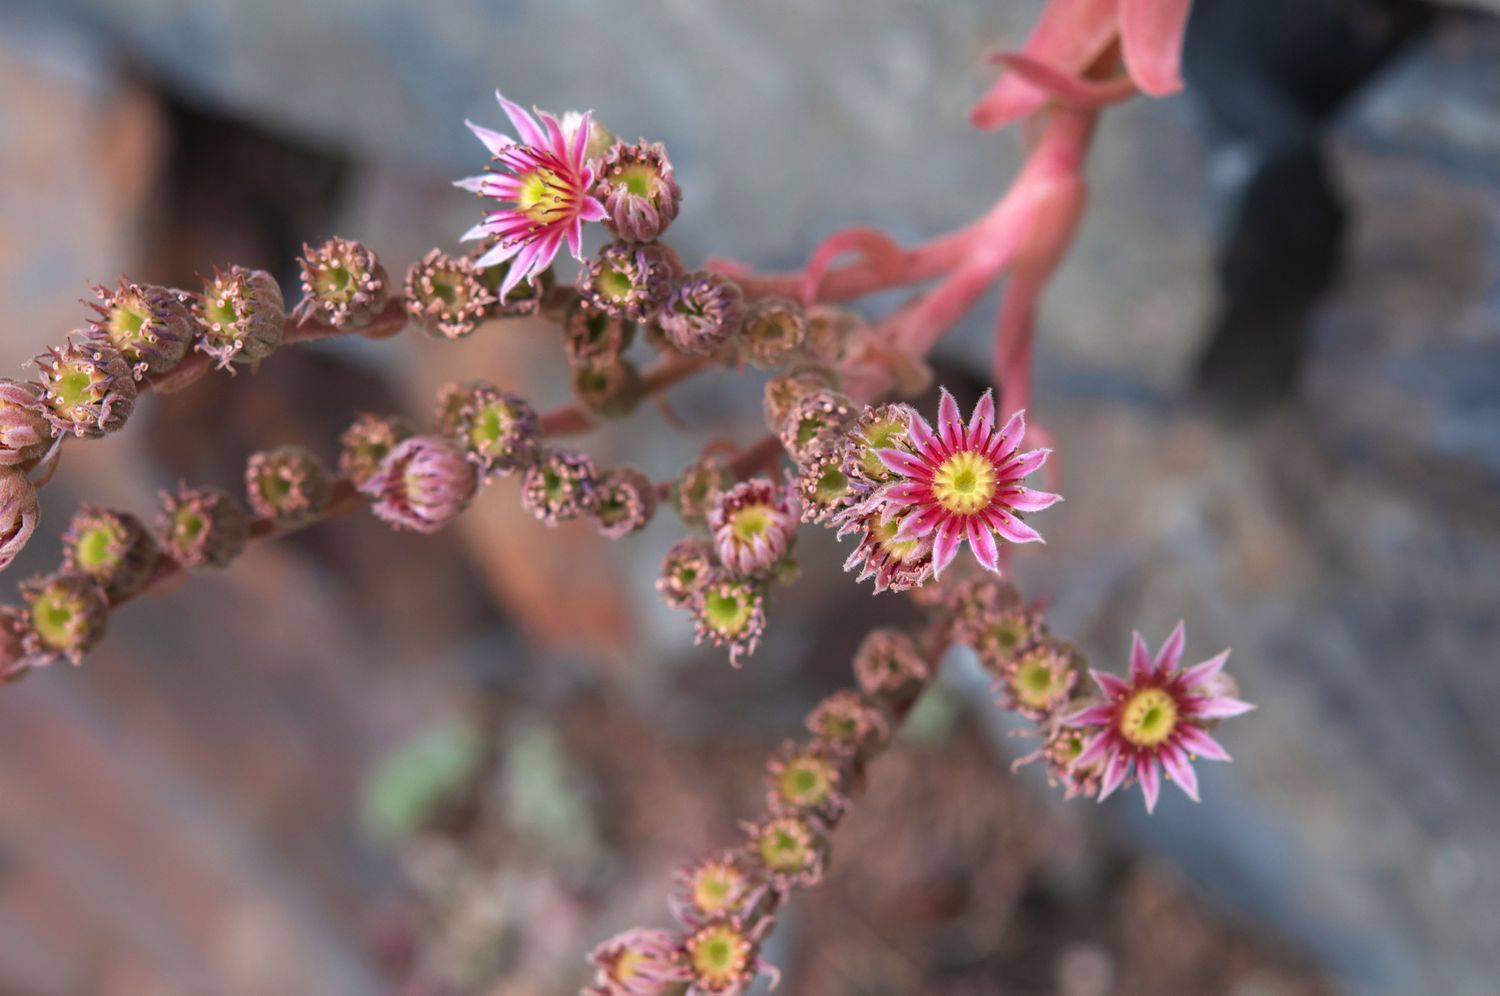 Hens and chicks succulent flower stalk with small pink flowers closeup